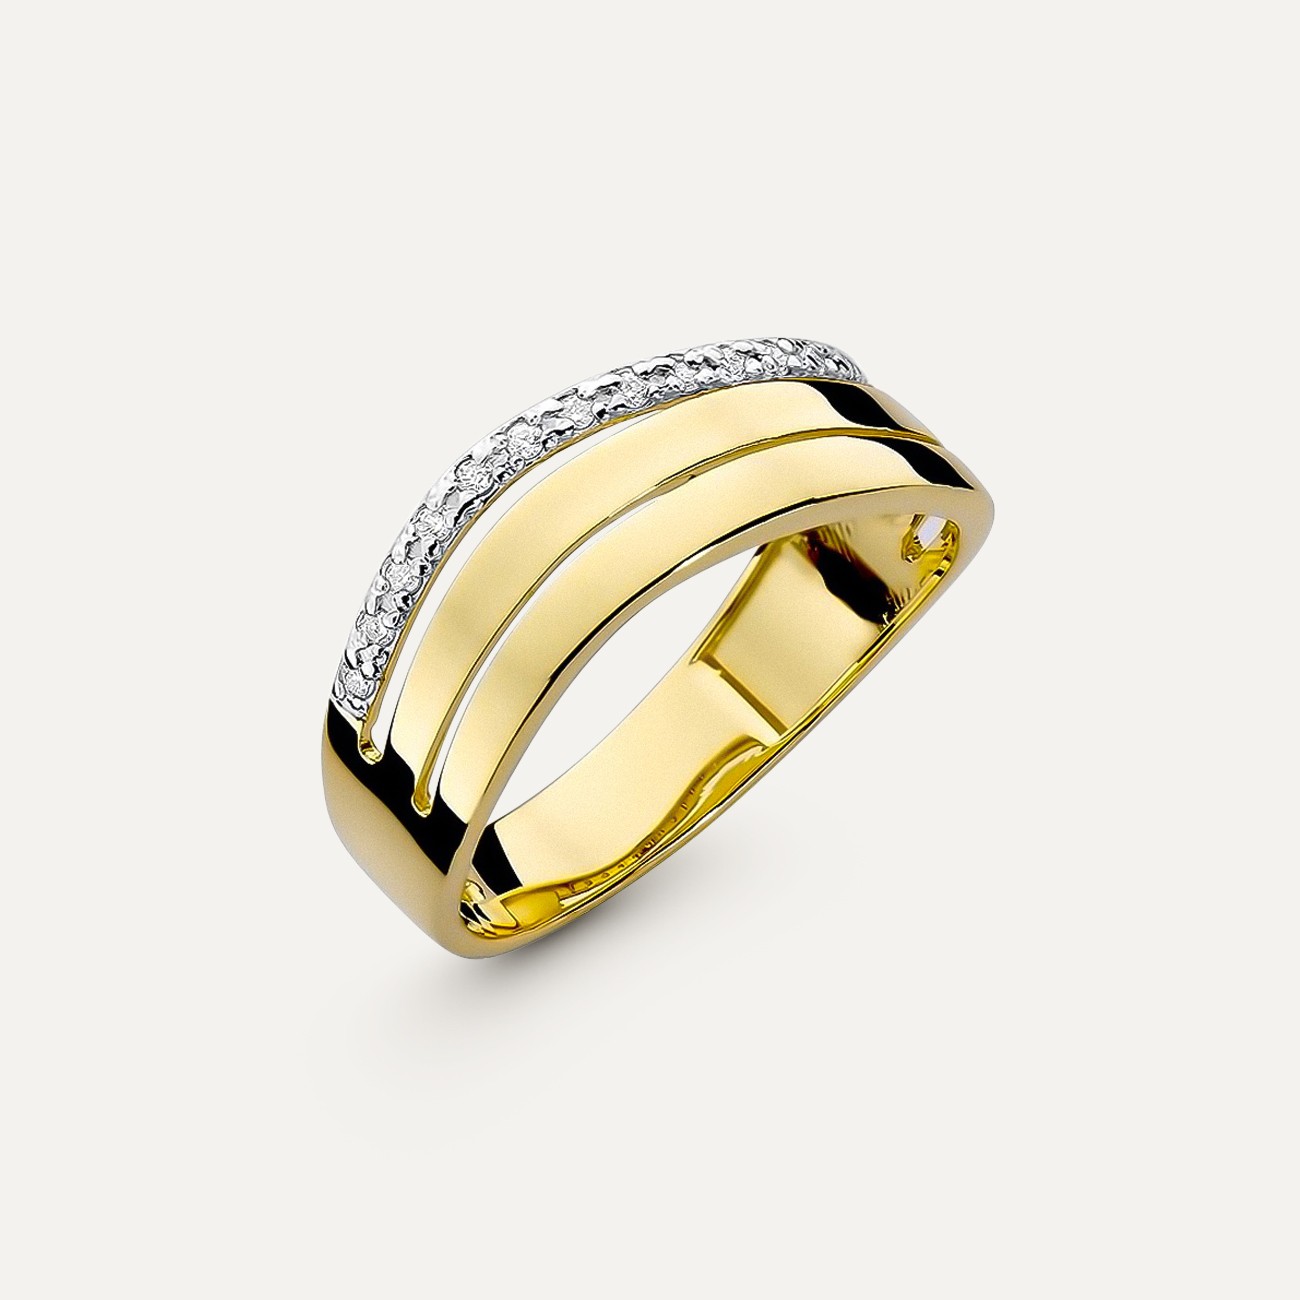 Gold braided ring with diamonds